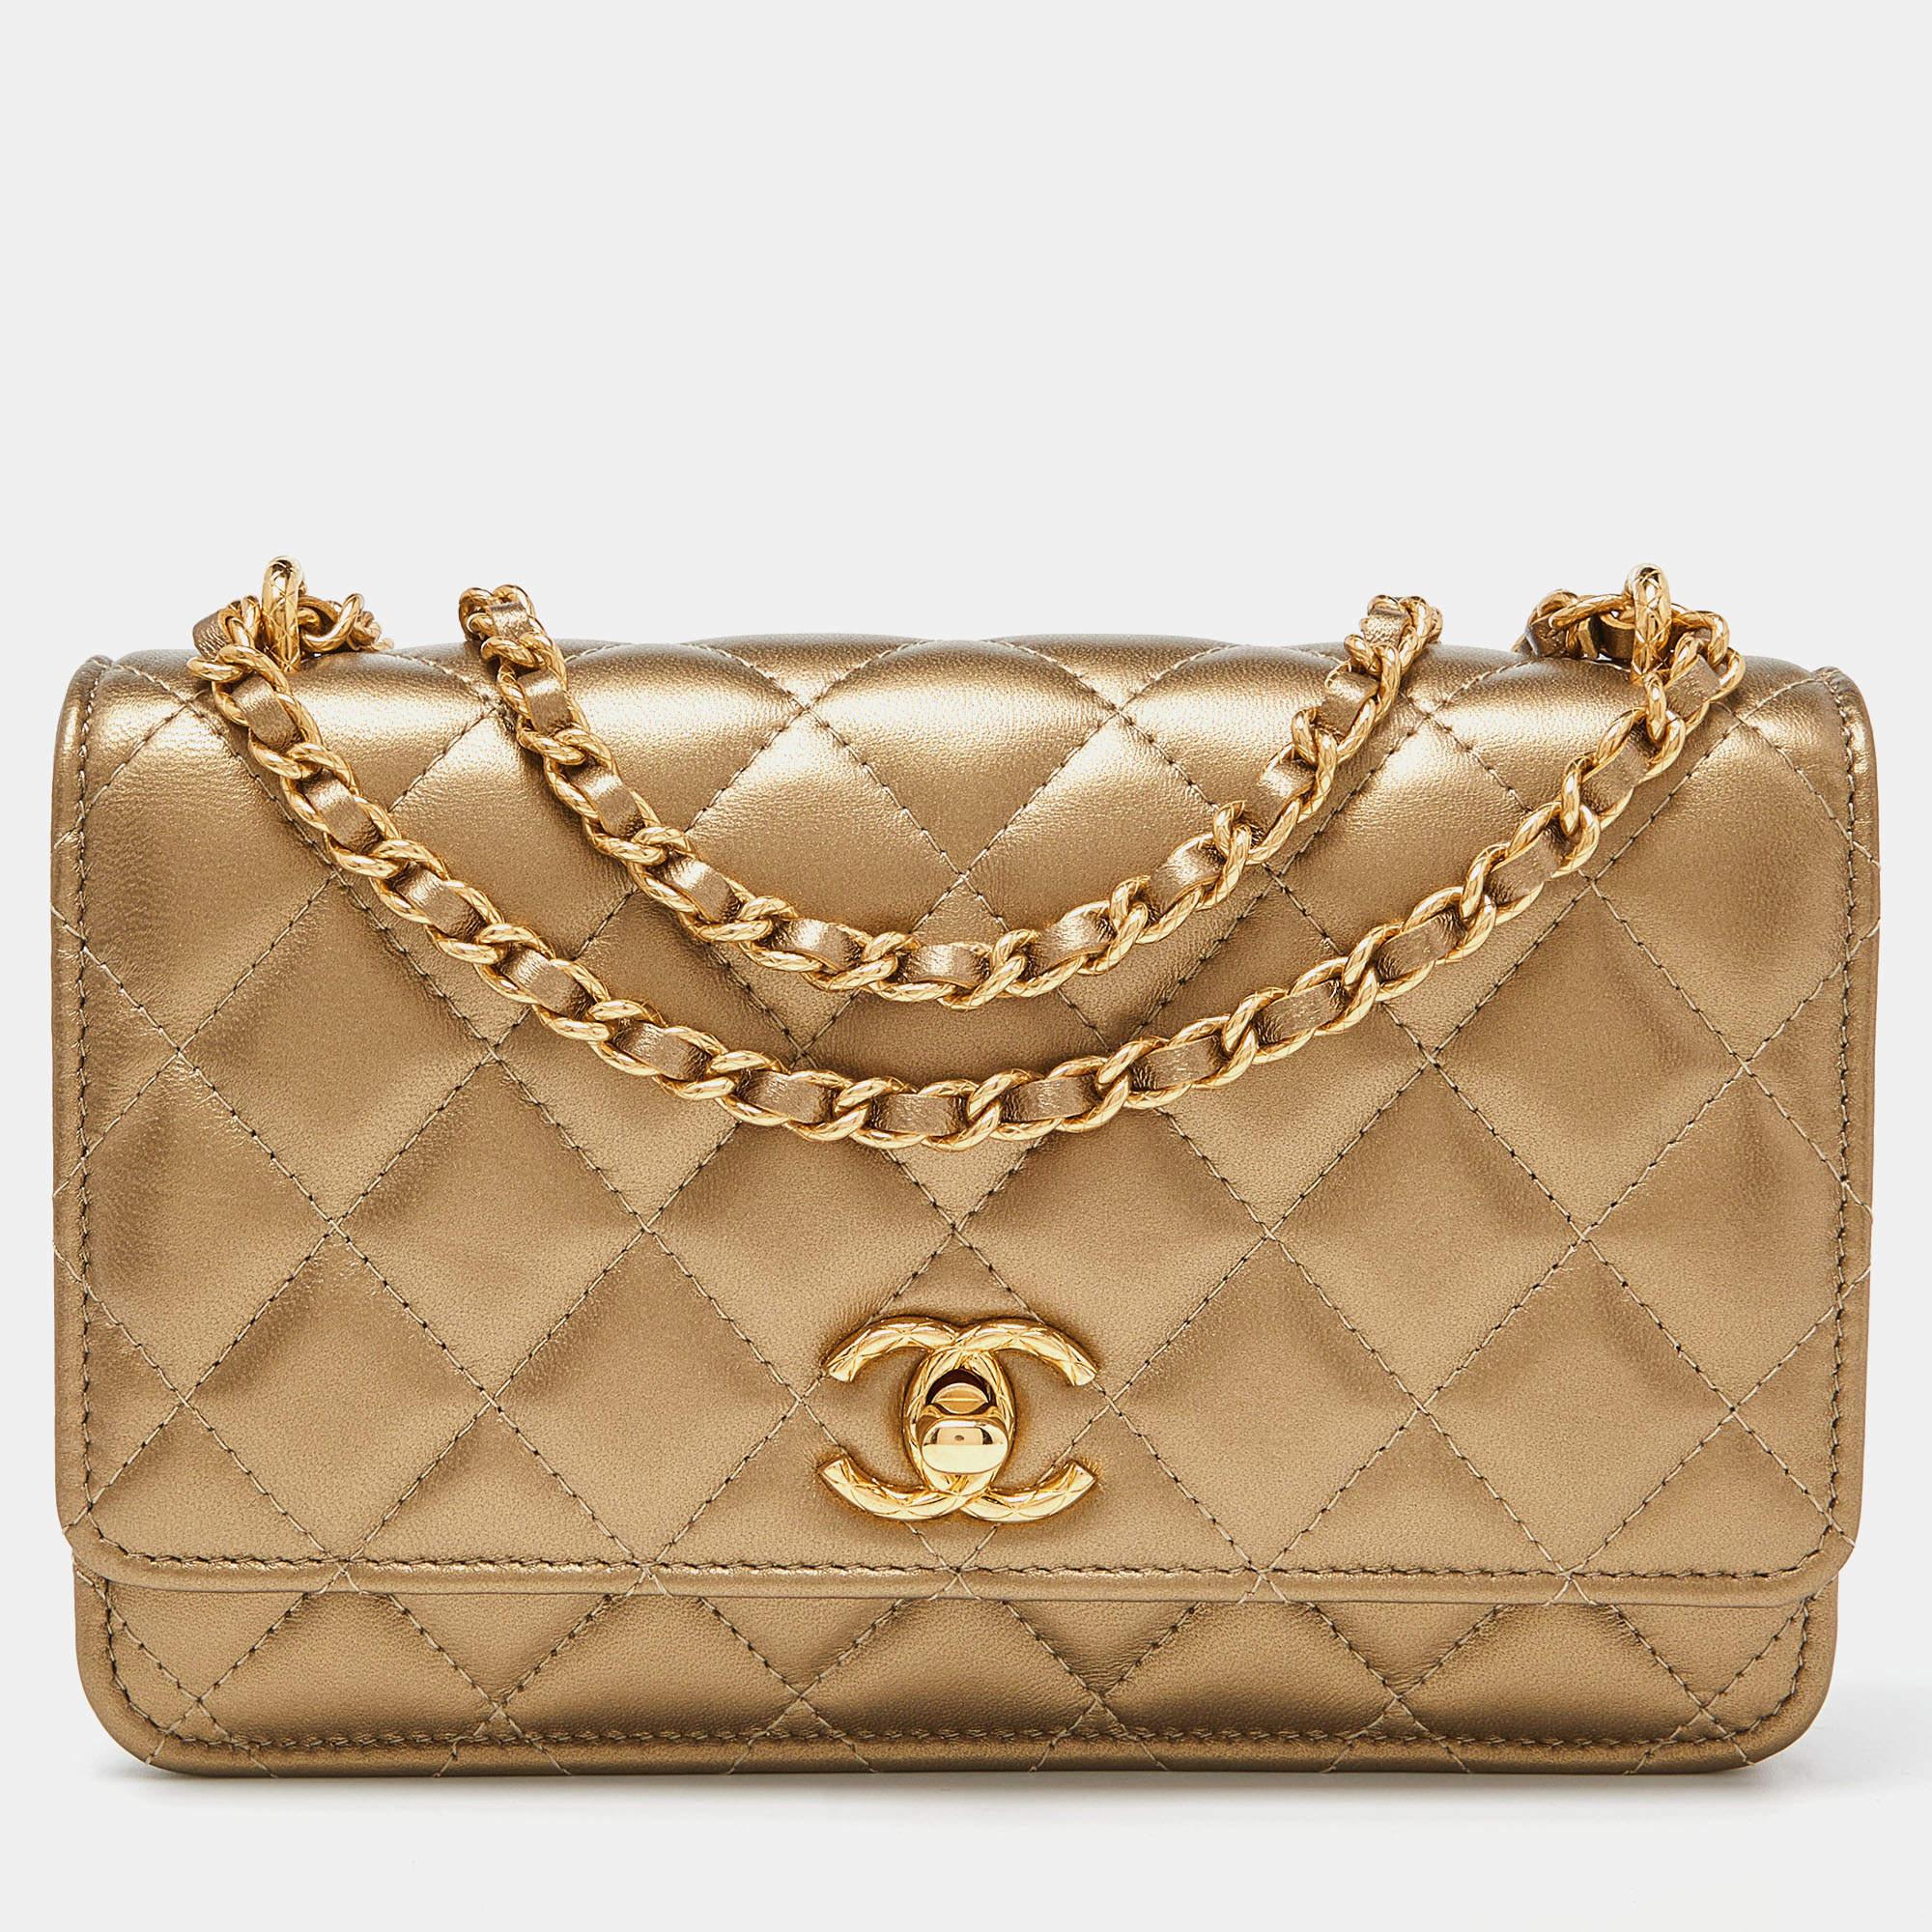 Trust this Chanel WOC to be light, durable, and comfortable to carry. Crafted from leather, it features an ample interior, a long chain strap, and the CC logo at the front.

